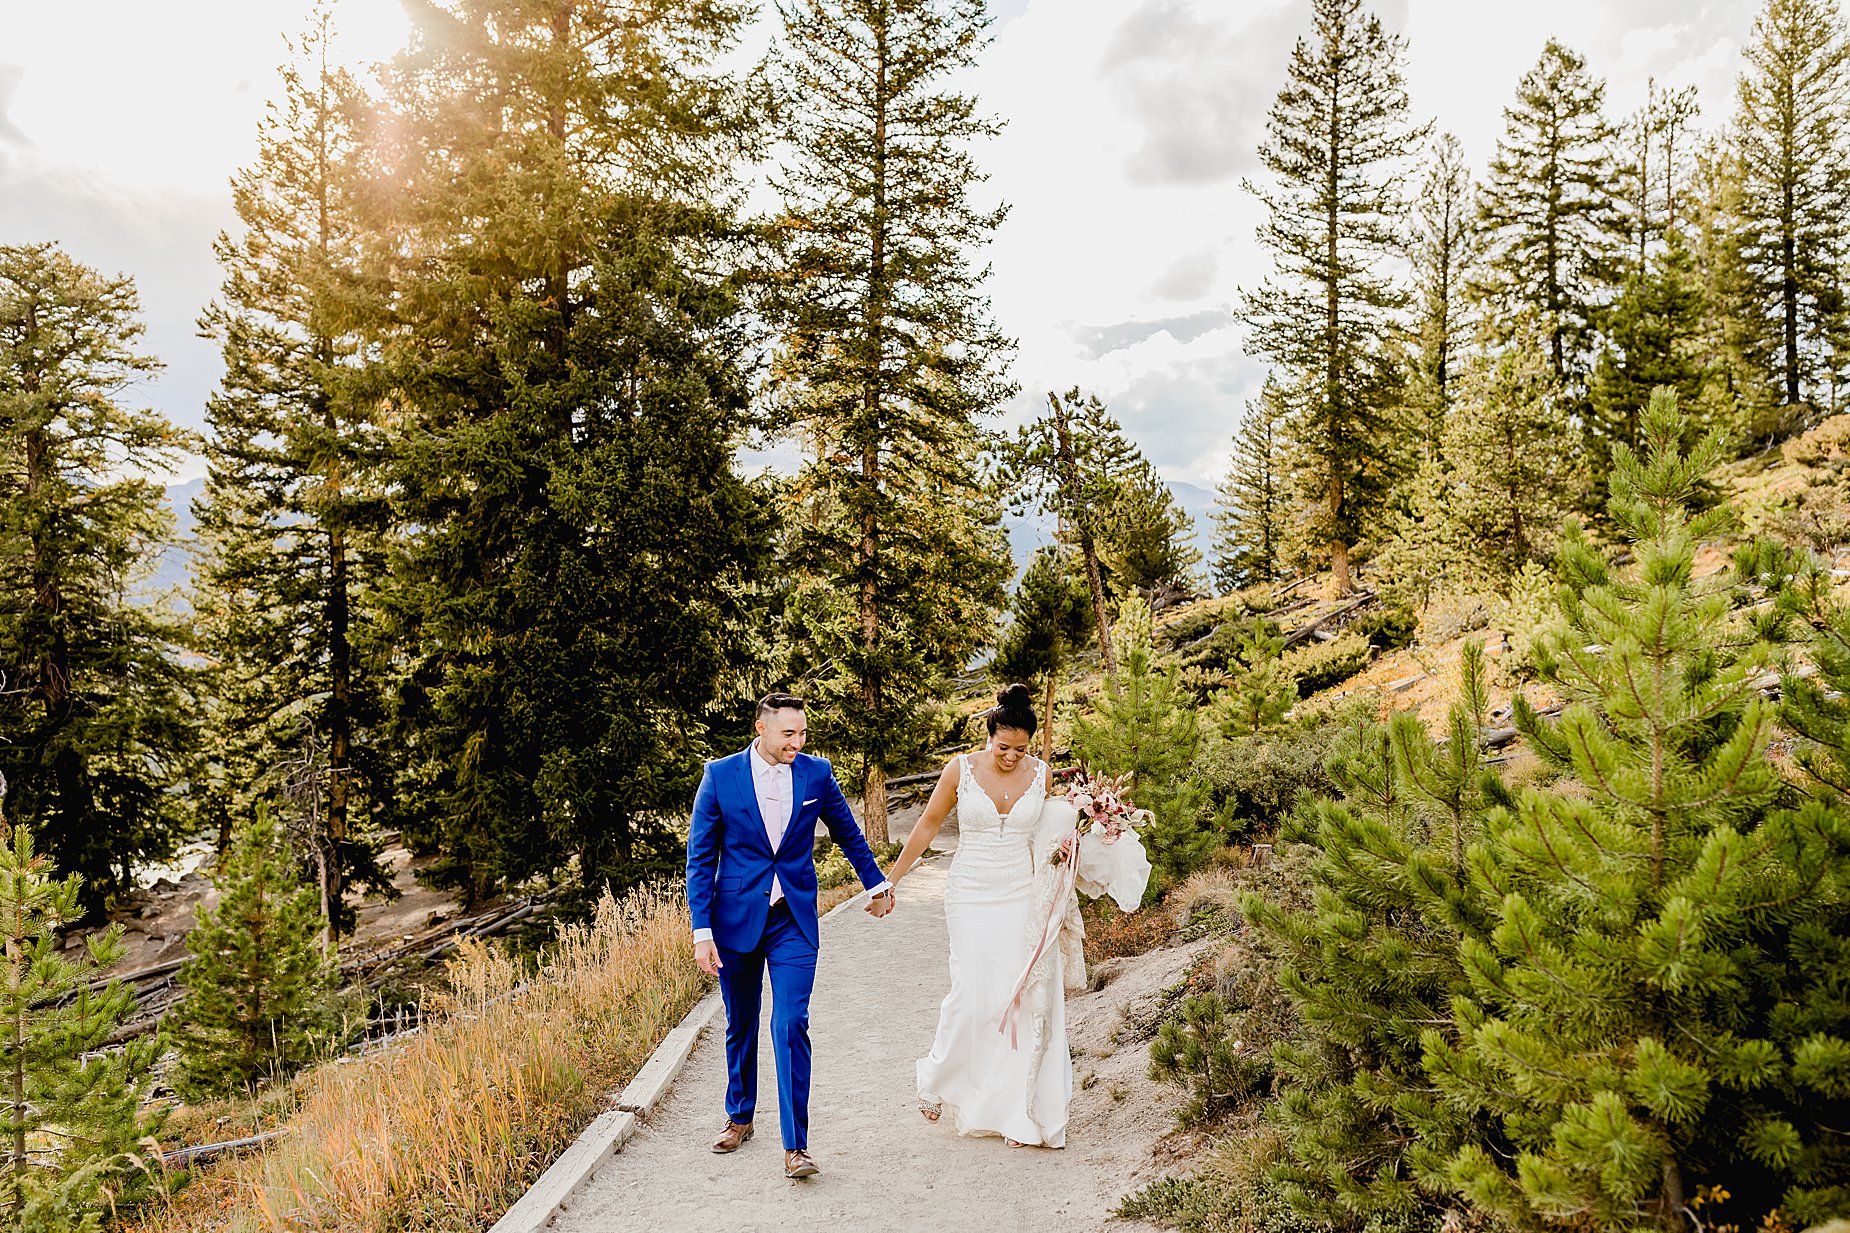 Couple hikes through forest in breckenridge colorado for their fall elopement